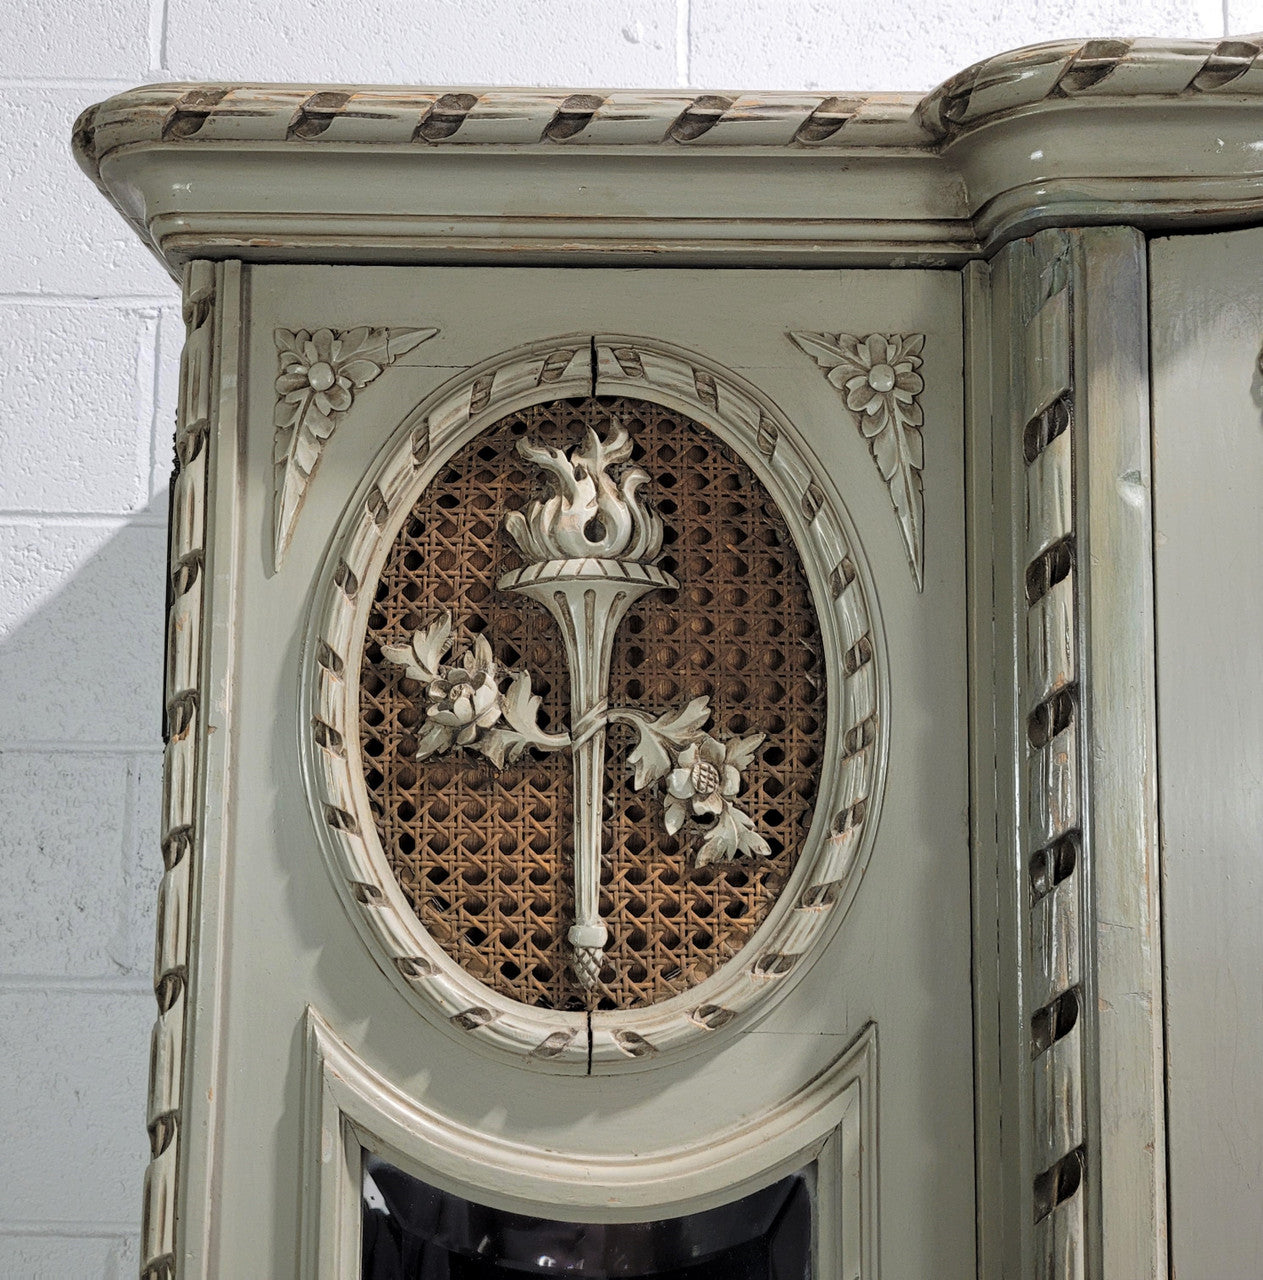 Stunning and desirable Antique French three full length mirror doors, Louis Xl style armoire with original chalk paint finish. With superb carving and decoration. Plenty of storage space with hanging space and shelves.